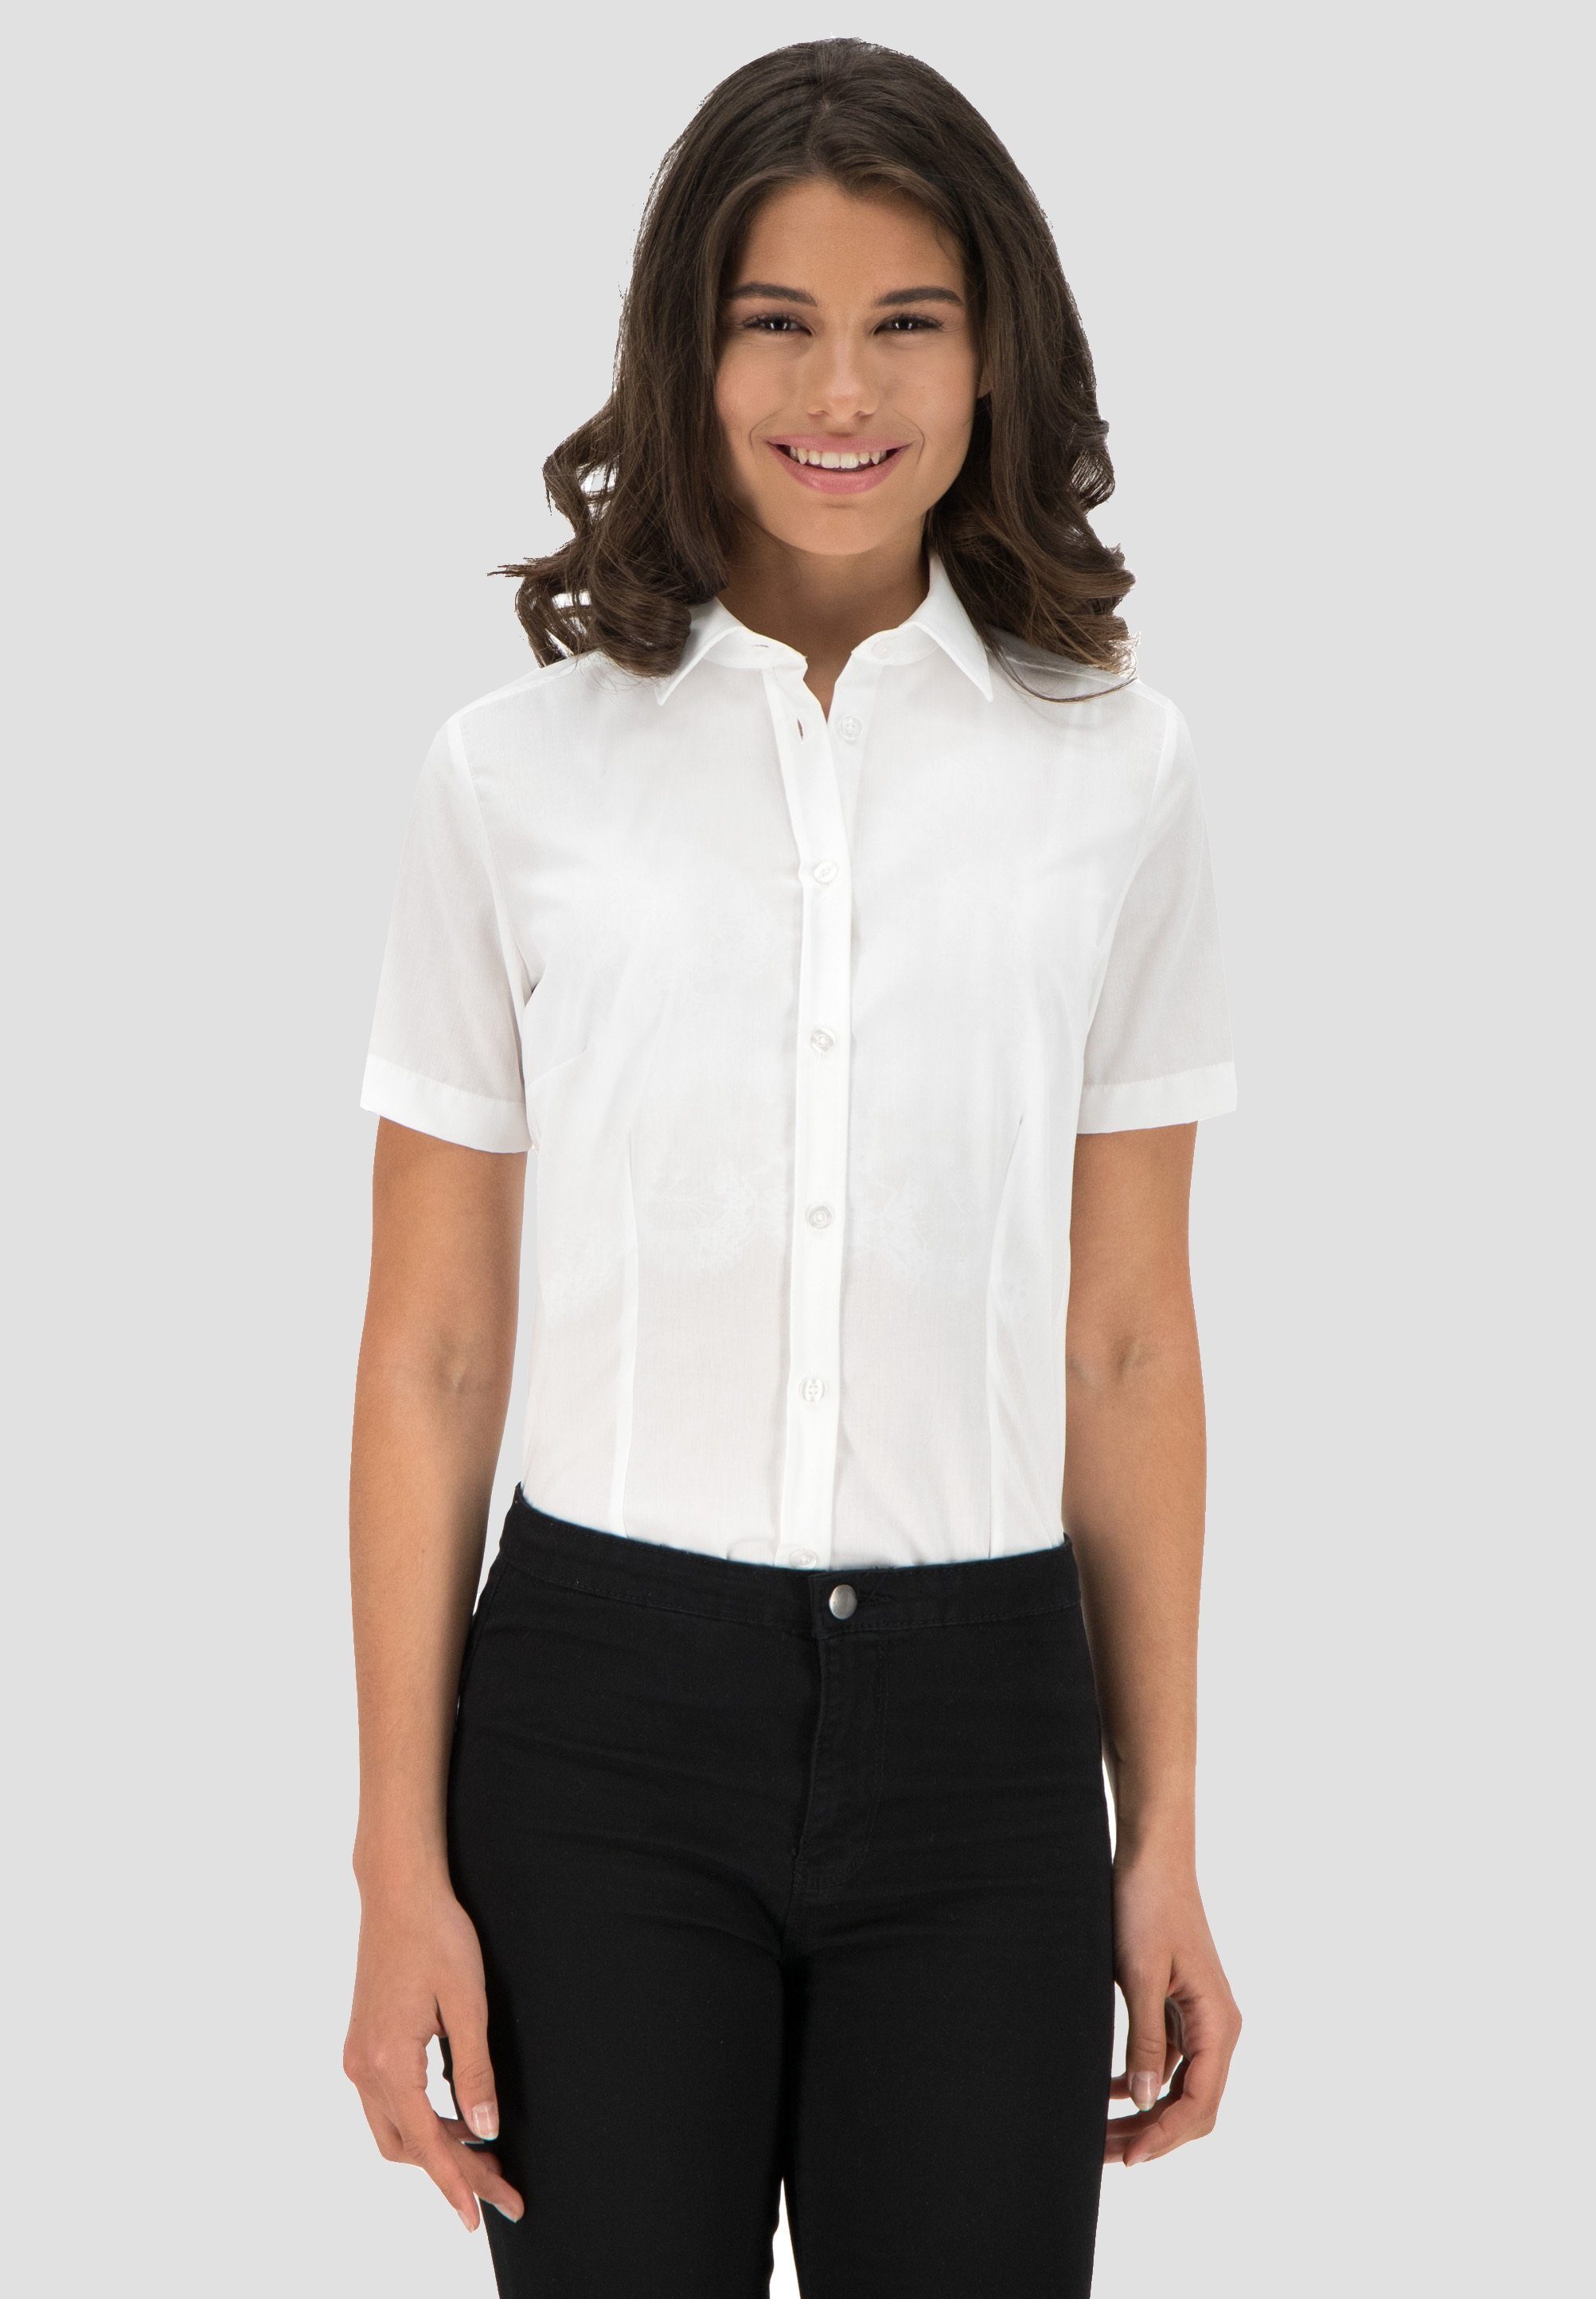 Petermann Flanellbluse Sofia in Slim moderner Fit-Passform